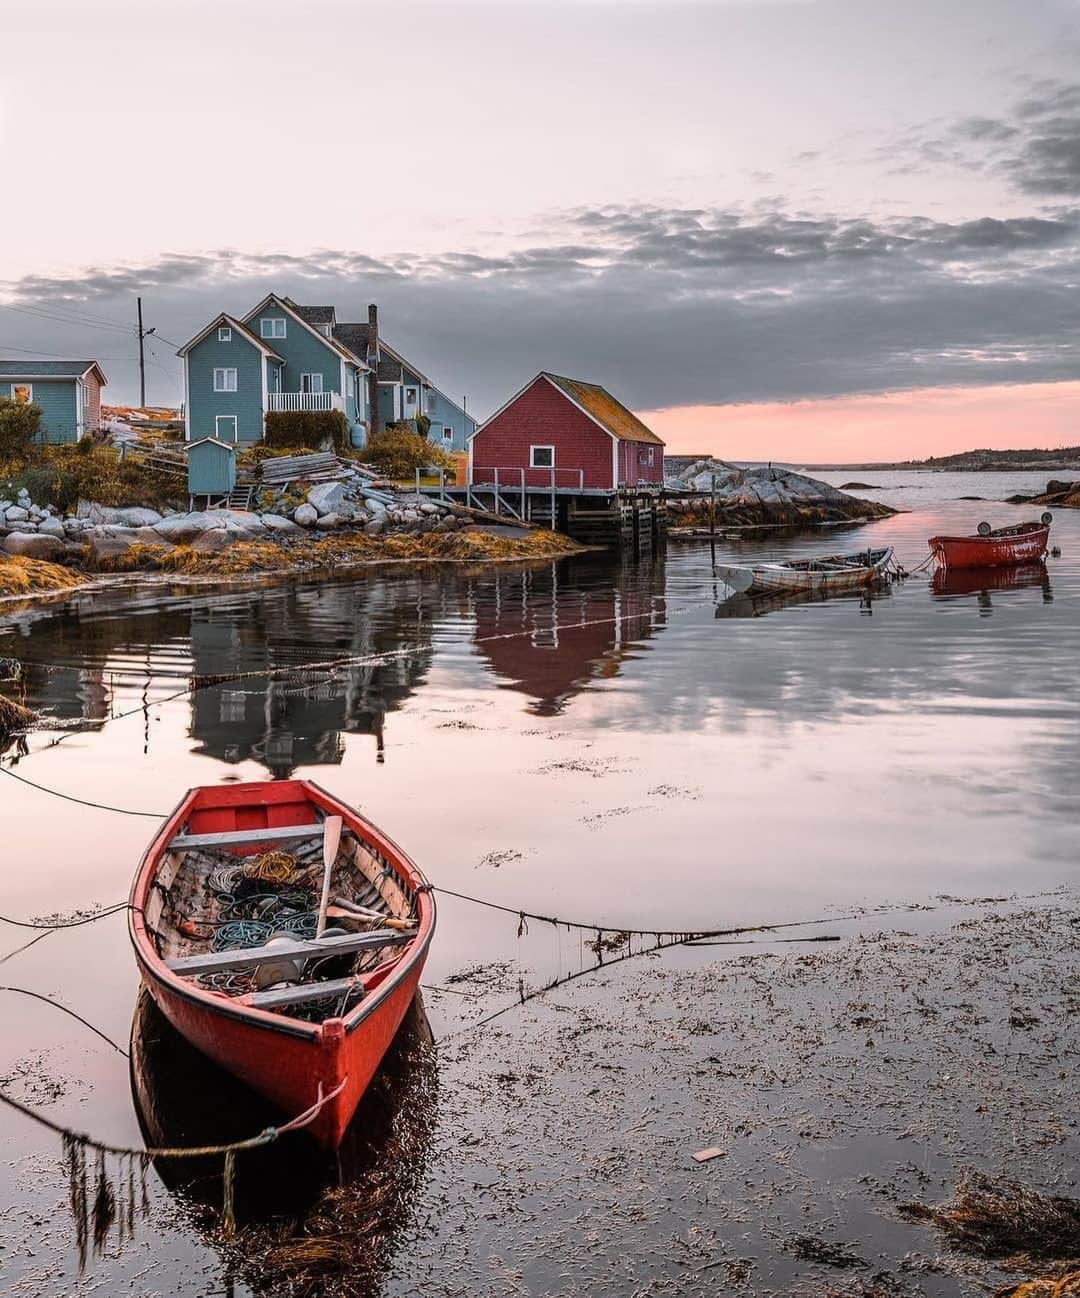 Explore Canadaさんのインスタグラム写真 - (Explore CanadaInstagram)「Today's #CanadaSpotlight is on @discoverhalifax!⁠⠀ ⁠⠀ This picturesque city by the sea is the capital of Nova Scotia and although it might be pretty small, it certainly packs a punch! Here are some of our favourite things to do in Halifax and the surrounding area:⁠⠀ ⁠⠀ ❤️ Stroll along the Halifax Waterfront - a 4km seafront boardwalk where you’ll find yourself making lots of stops to browse boutique shops, watch the boats come and go from the harbour and have a quick nibble or sip at one of the many bars and restaurants.⁠⠀ 💙 Explore the Citadel Hill National Historic Site. Positioned atop a grassy slope, this star-shaped fort overlooks the city and is home to some fascinating historical exhibits including barracks, the guard’s room and the gunpowder magazines. ⁠⠀ 💛 Photograph the colourful houses in the North End, before enjoying some delicious, locally sourced, seasonal food in one of the popular restaurants in the neighbourhood.⁠⠀ 💚 Hop on a ferry over to McNabs Island for the day. Here, you can explore over 22km of hiking trails and take in the fresh air and epic forest and coastal landscapes. It’s also a great spot to go birding, with over 206 different bird species that can be spotted from the island!⁠⠀ ⁠⠀ For more information and beautiful photos of Halifax, head over to @discoverhalifax! If you’re local to Nova Scotia, be sure to also check out their great guides and itineraries in their story highlights. ⁠⠀ ⁠⠀ #ExploreCanada #ForGlowingHearts⁠⠀ ⁠⠀ 📷:⁠⠀ ⁠⠀ 1. @visitnovascotia & Scott Munn⁠⠀ 2&3. @discoverhalifax & J. Ingram⁠⠀ 4. @flyzone⁠⠀ 5. @jsn.ptrsn⁠⠀ 6. @ce.desrochers⁠⠀ 7. @realtygeek⁠⠀ 8. Celtic Colours International Festival⁠⠀ ⁠⠀ 📍: @discoverhalifax⁠⠀ ⁠⠀ #HeartSoulHalifax⁠⠀」8月15日 0時17分 - explorecanada